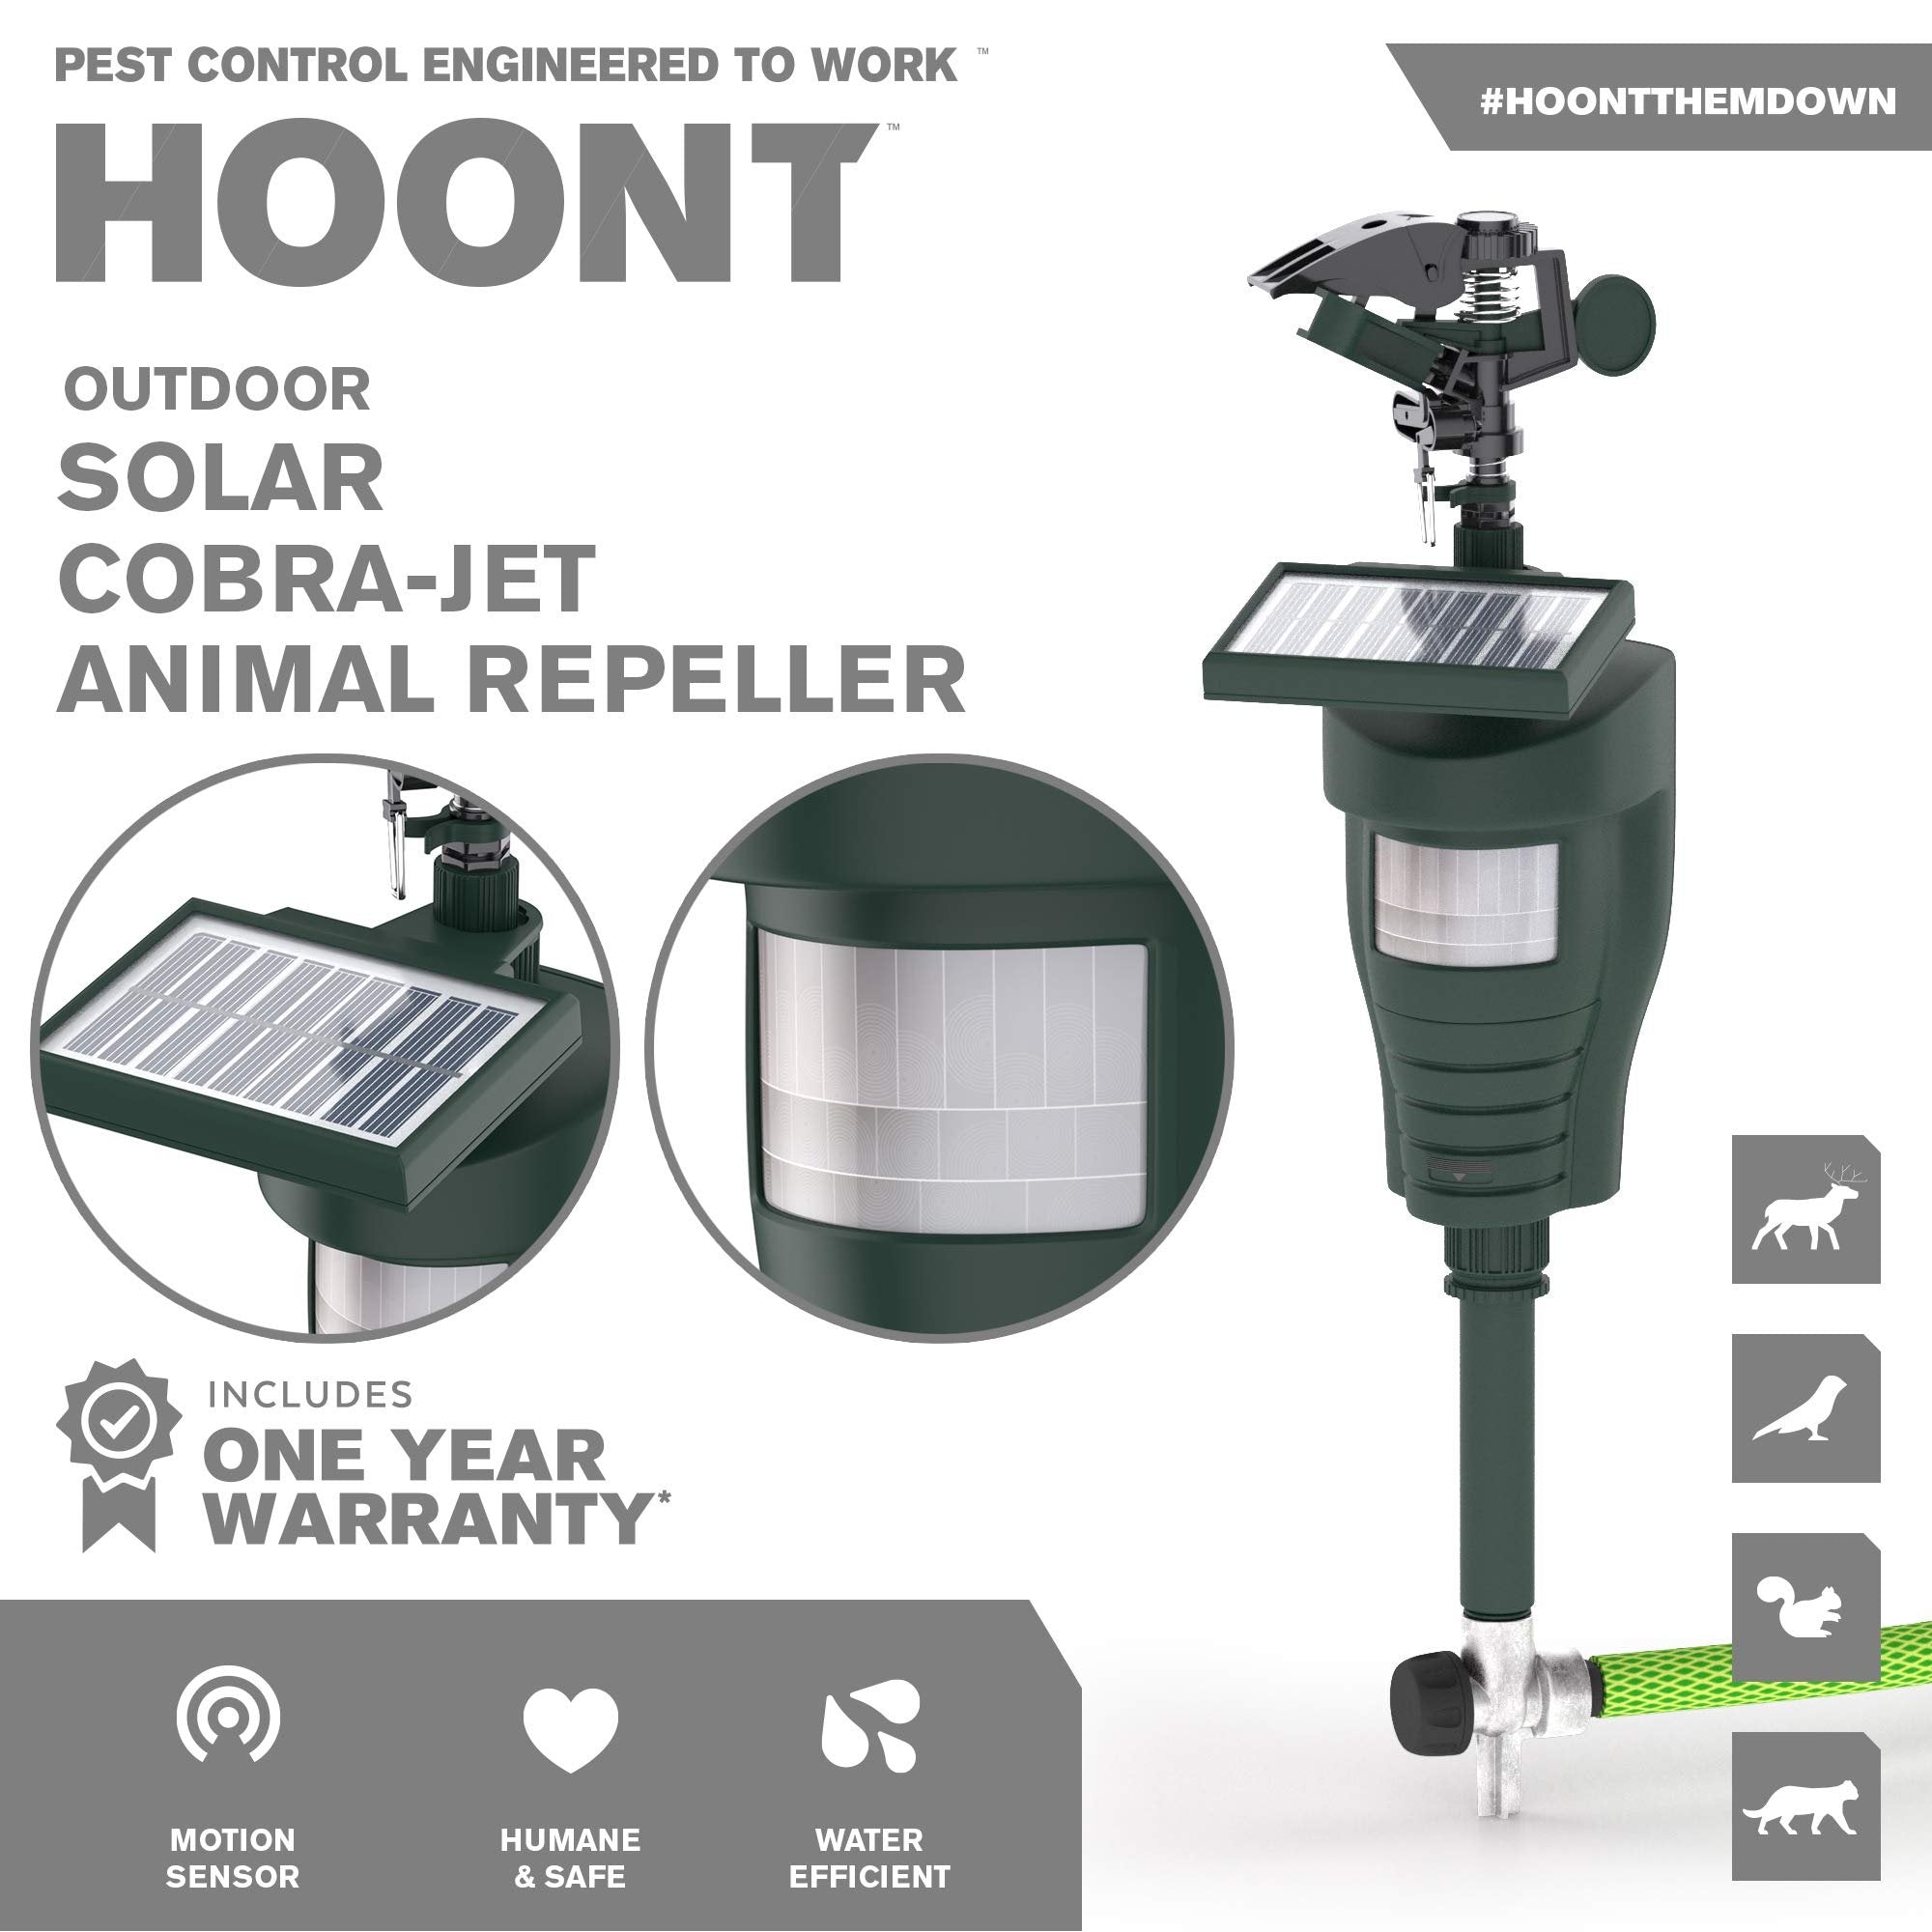 New Hoont Cobra Animal Repeller | Solar-Powered Water Blaster | Motion-Activated | Protect Yard & Garden | Size: Large